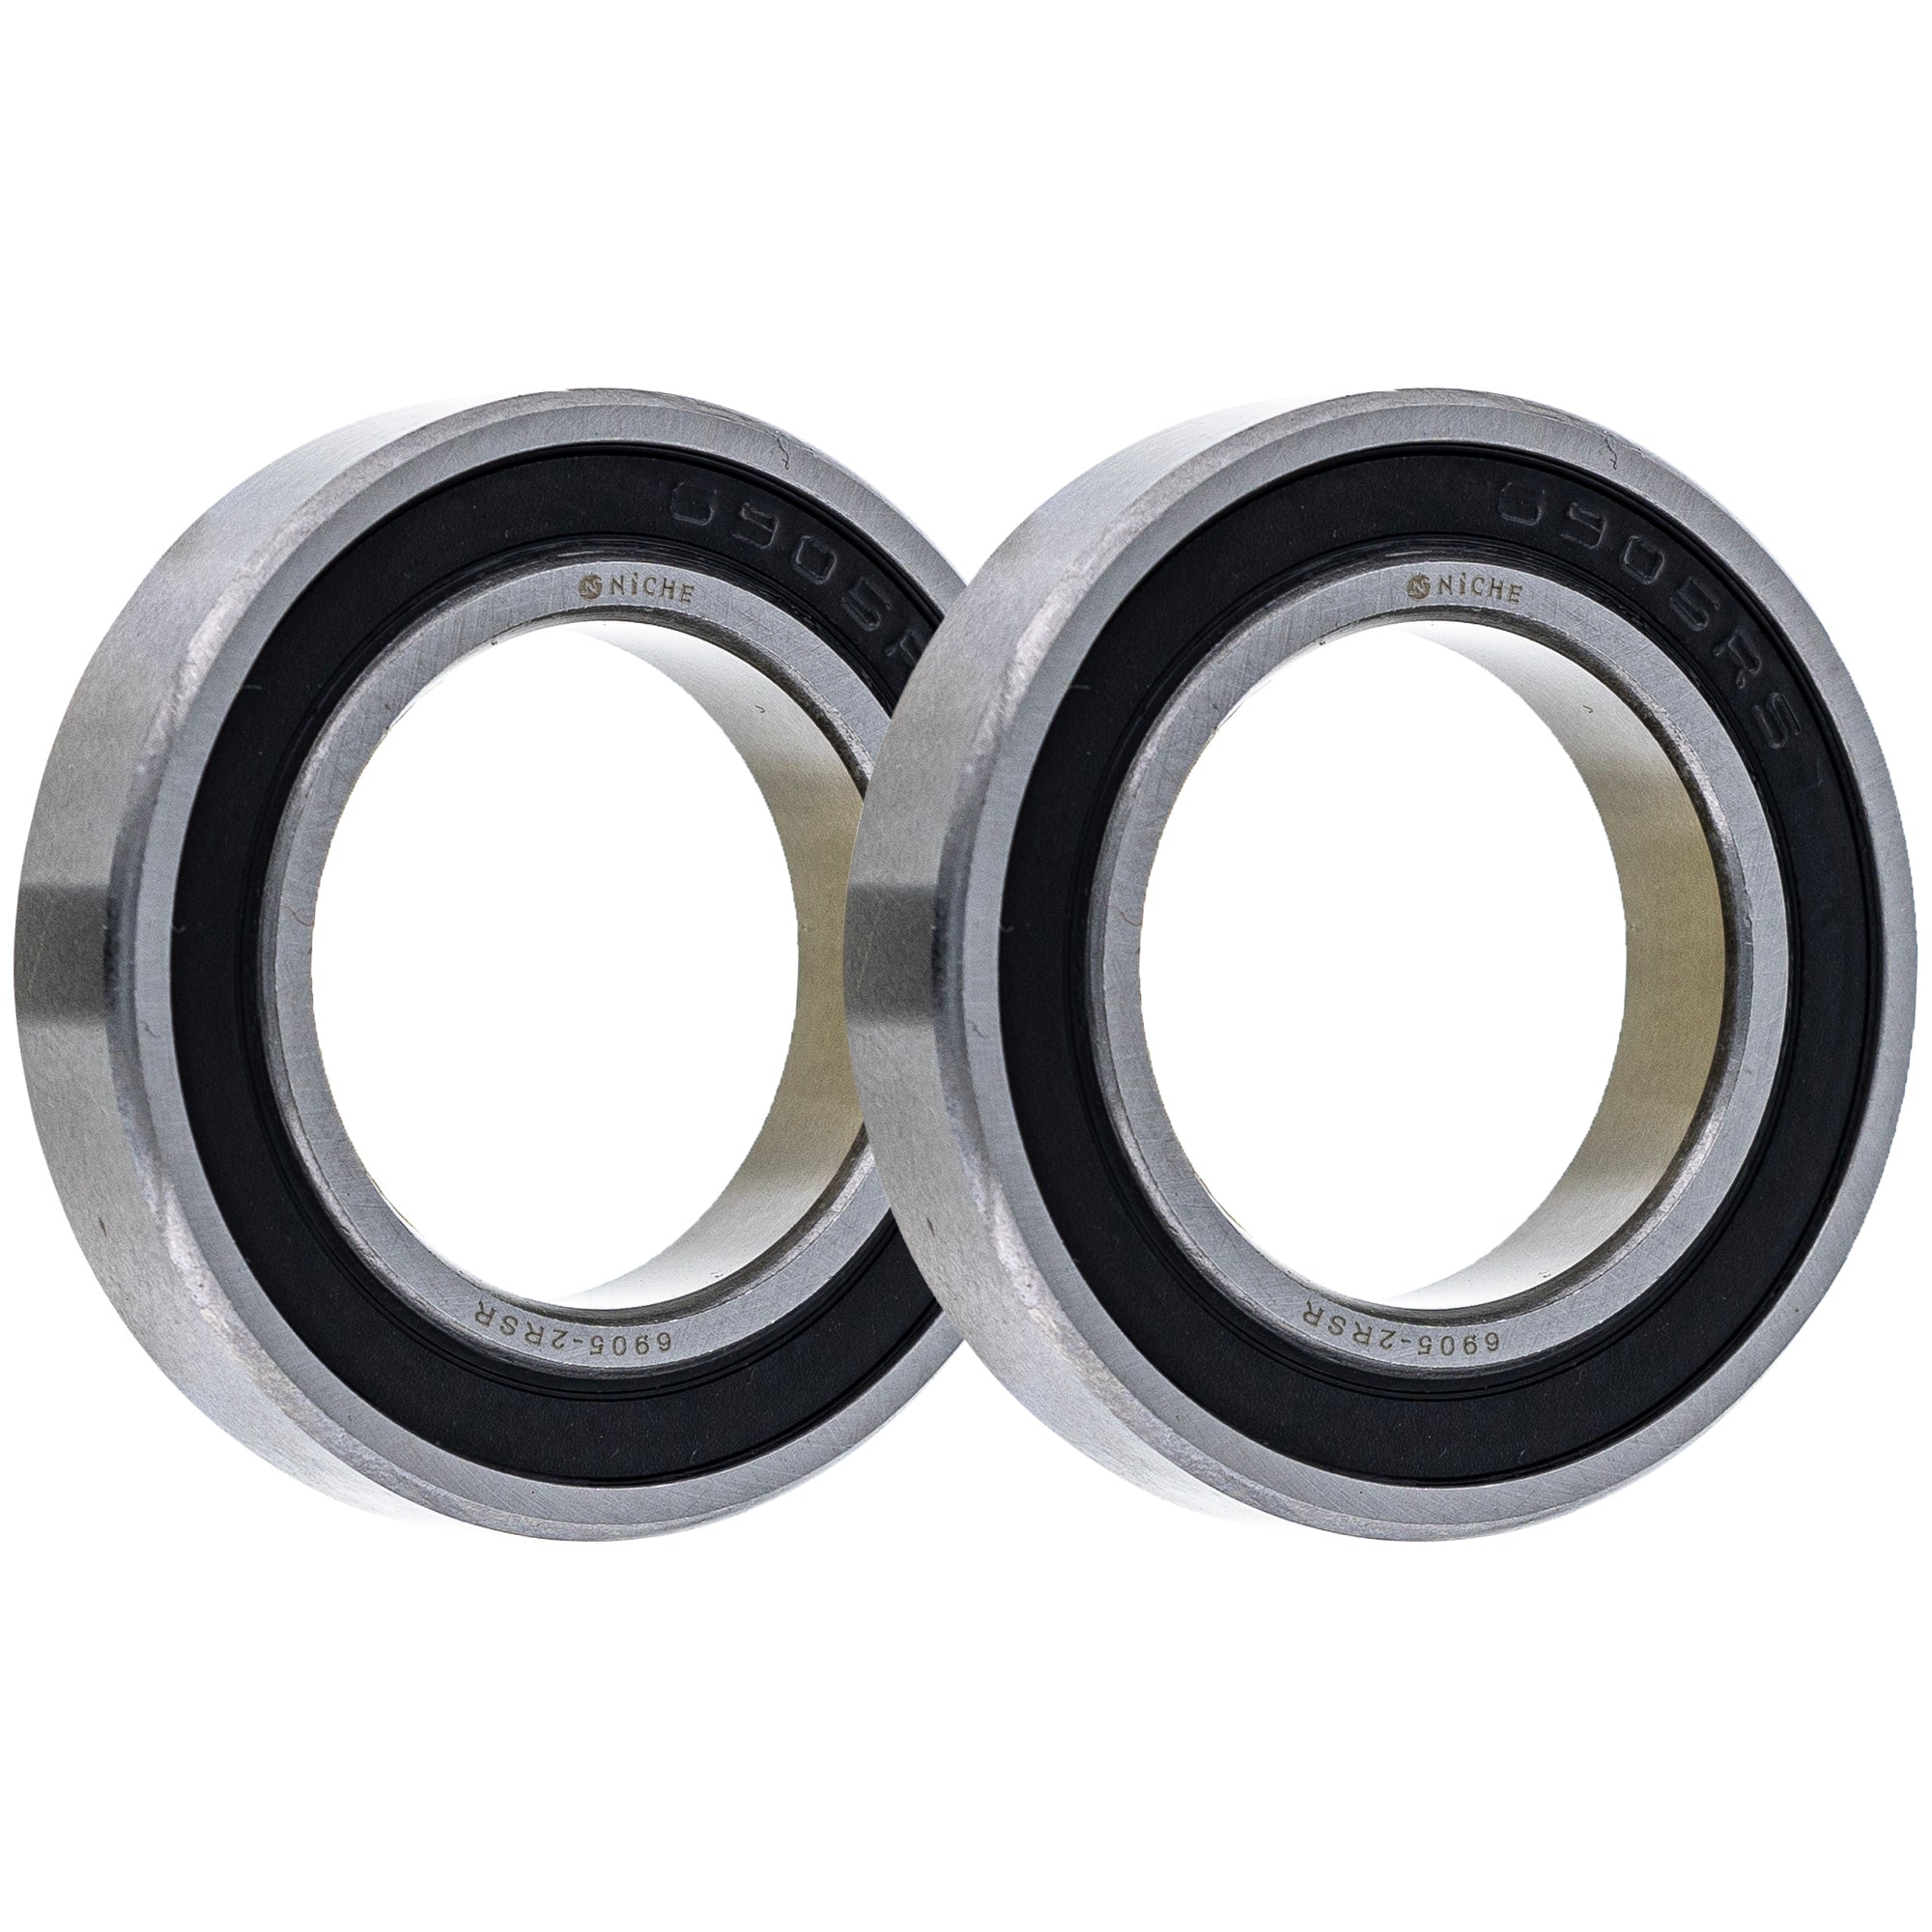 Single Row, Deep Groove, Ball Bearing Pack of 2 2-Pack for zOTHER VTX1800T3 VTX1800T2 NICHE 519-CBB2338R